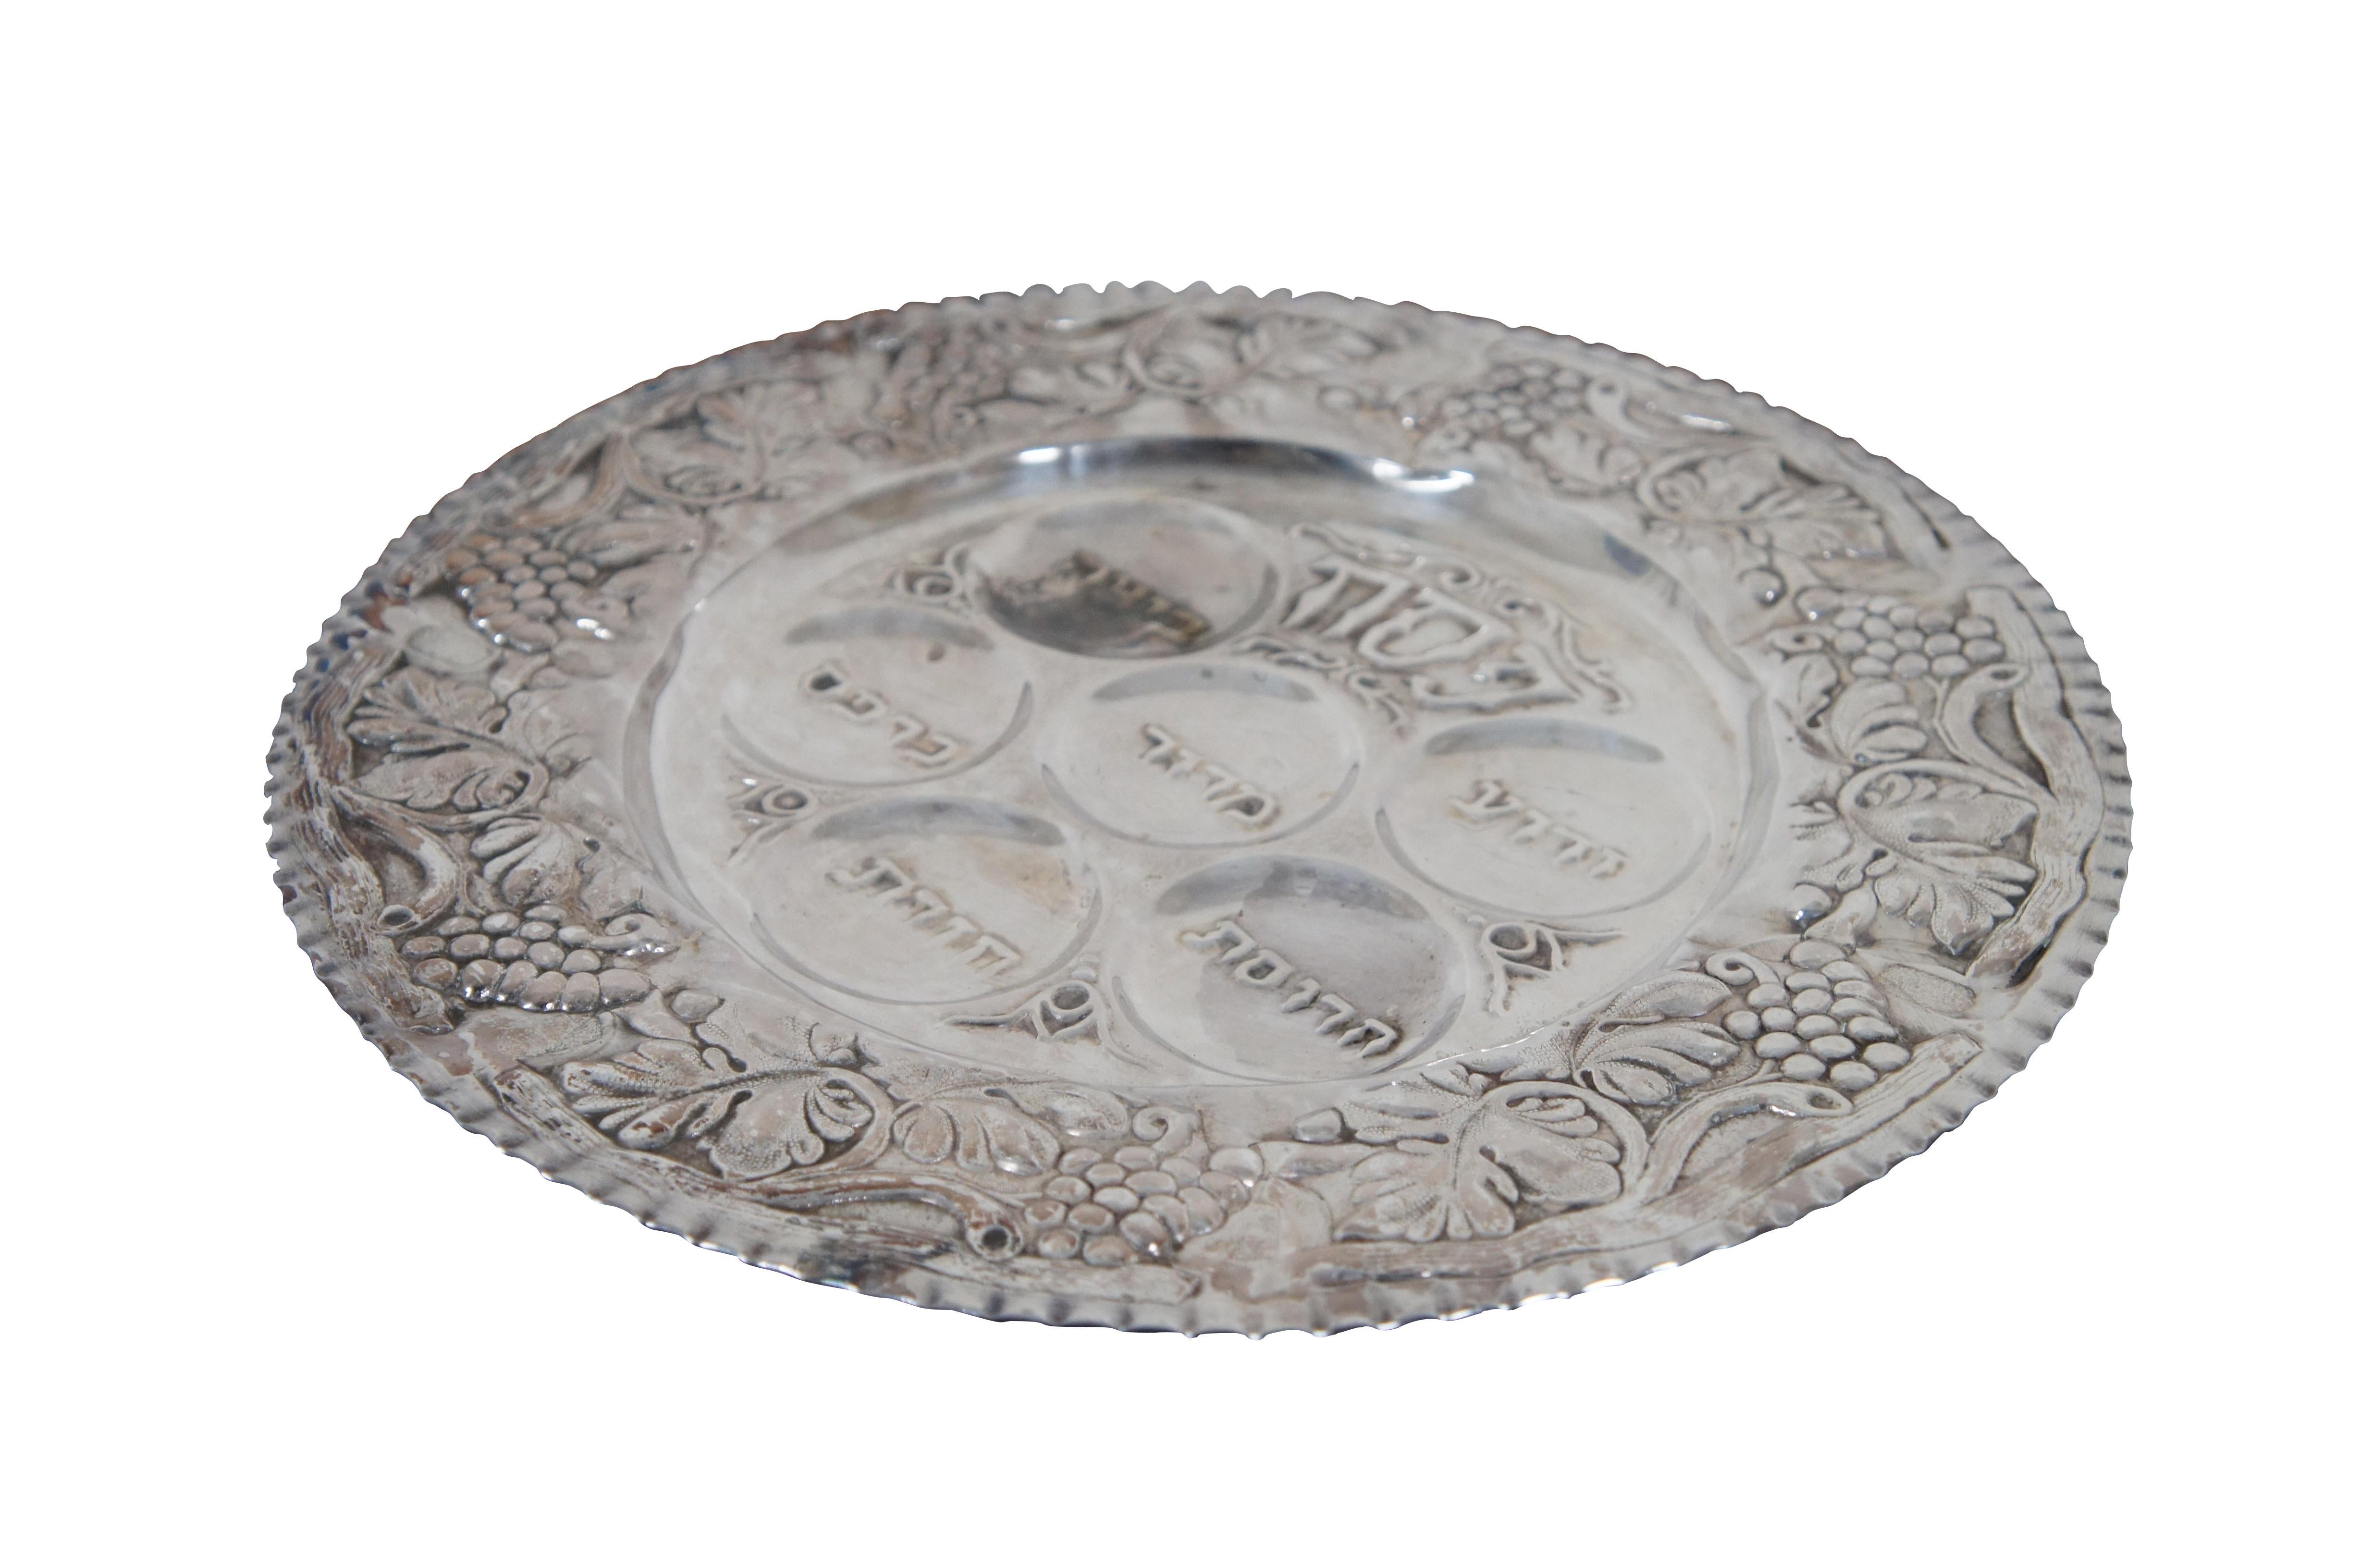 Vintage Jewish / Judaica Passover Pesach Sedar plate featuring low relief detail with grapevine and leaves and scalloped edge.

Dimensions:
12.75